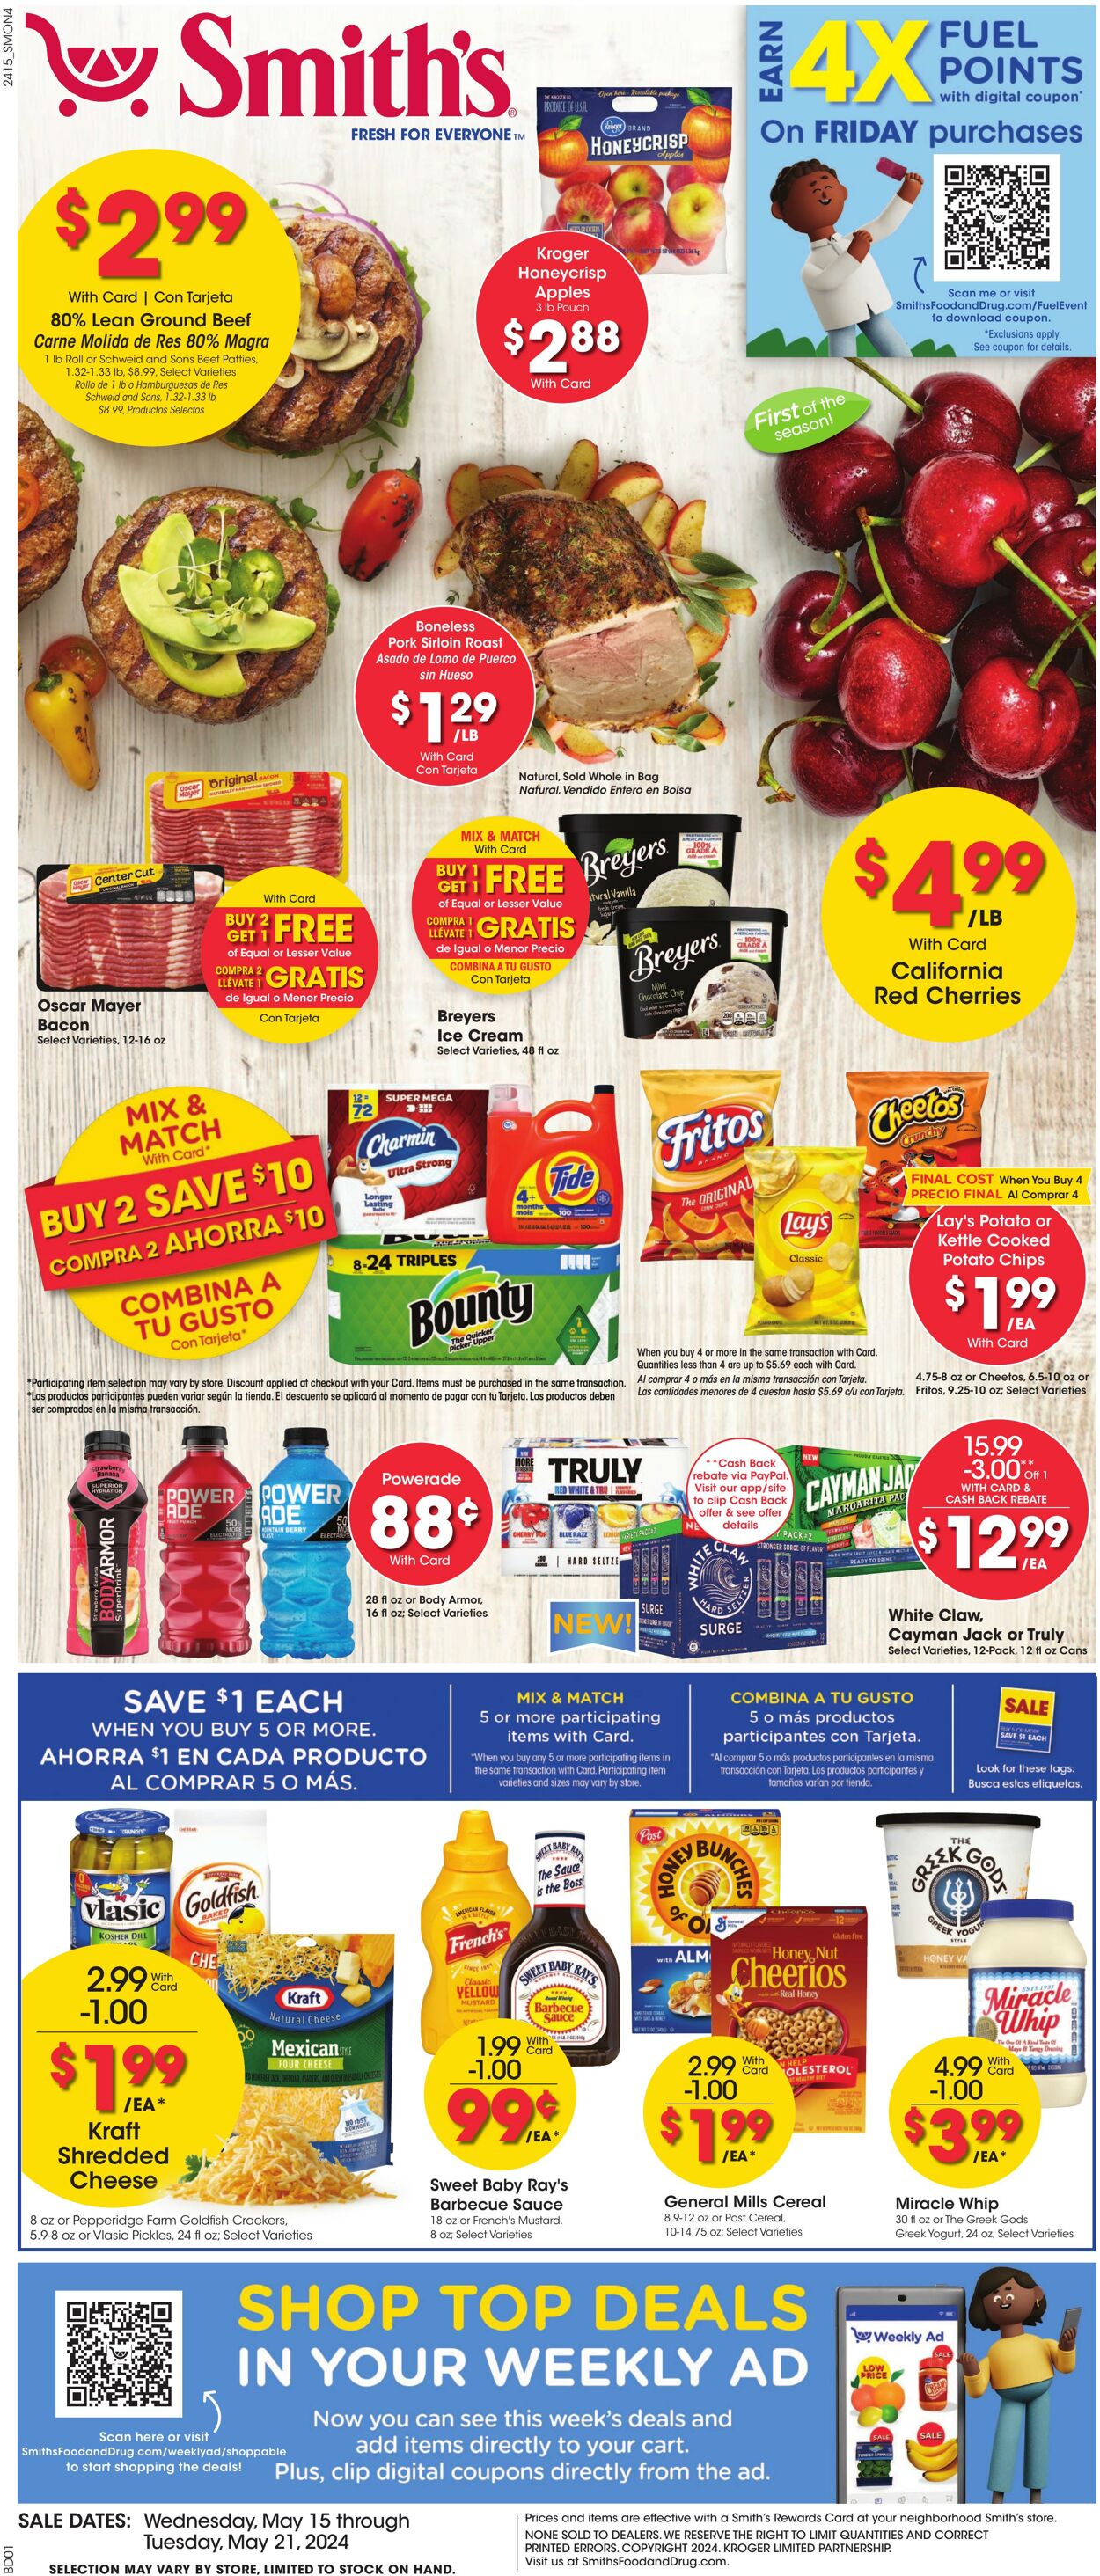 Smith’s Food and Drug Promotional weekly ads